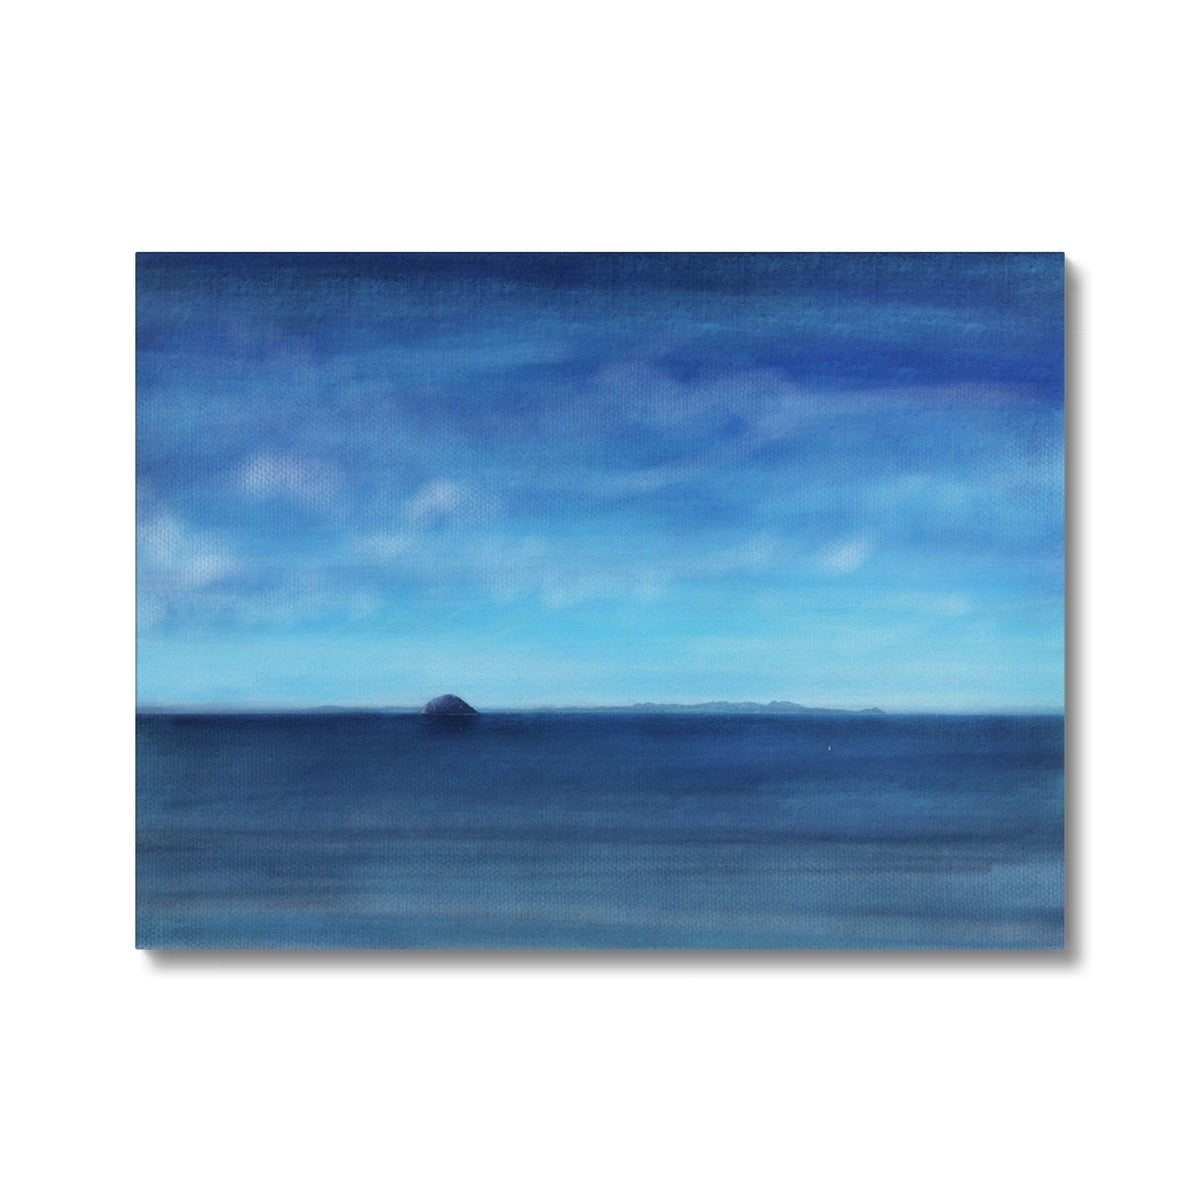 Ailsa Craig & Arran Painting | Canvas From Scotland-Contemporary Stretched Canvas Prints-Arran Art Gallery-24"x18"-Paintings, Prints, Homeware, Art Gifts From Scotland By Scottish Artist Kevin Hunter